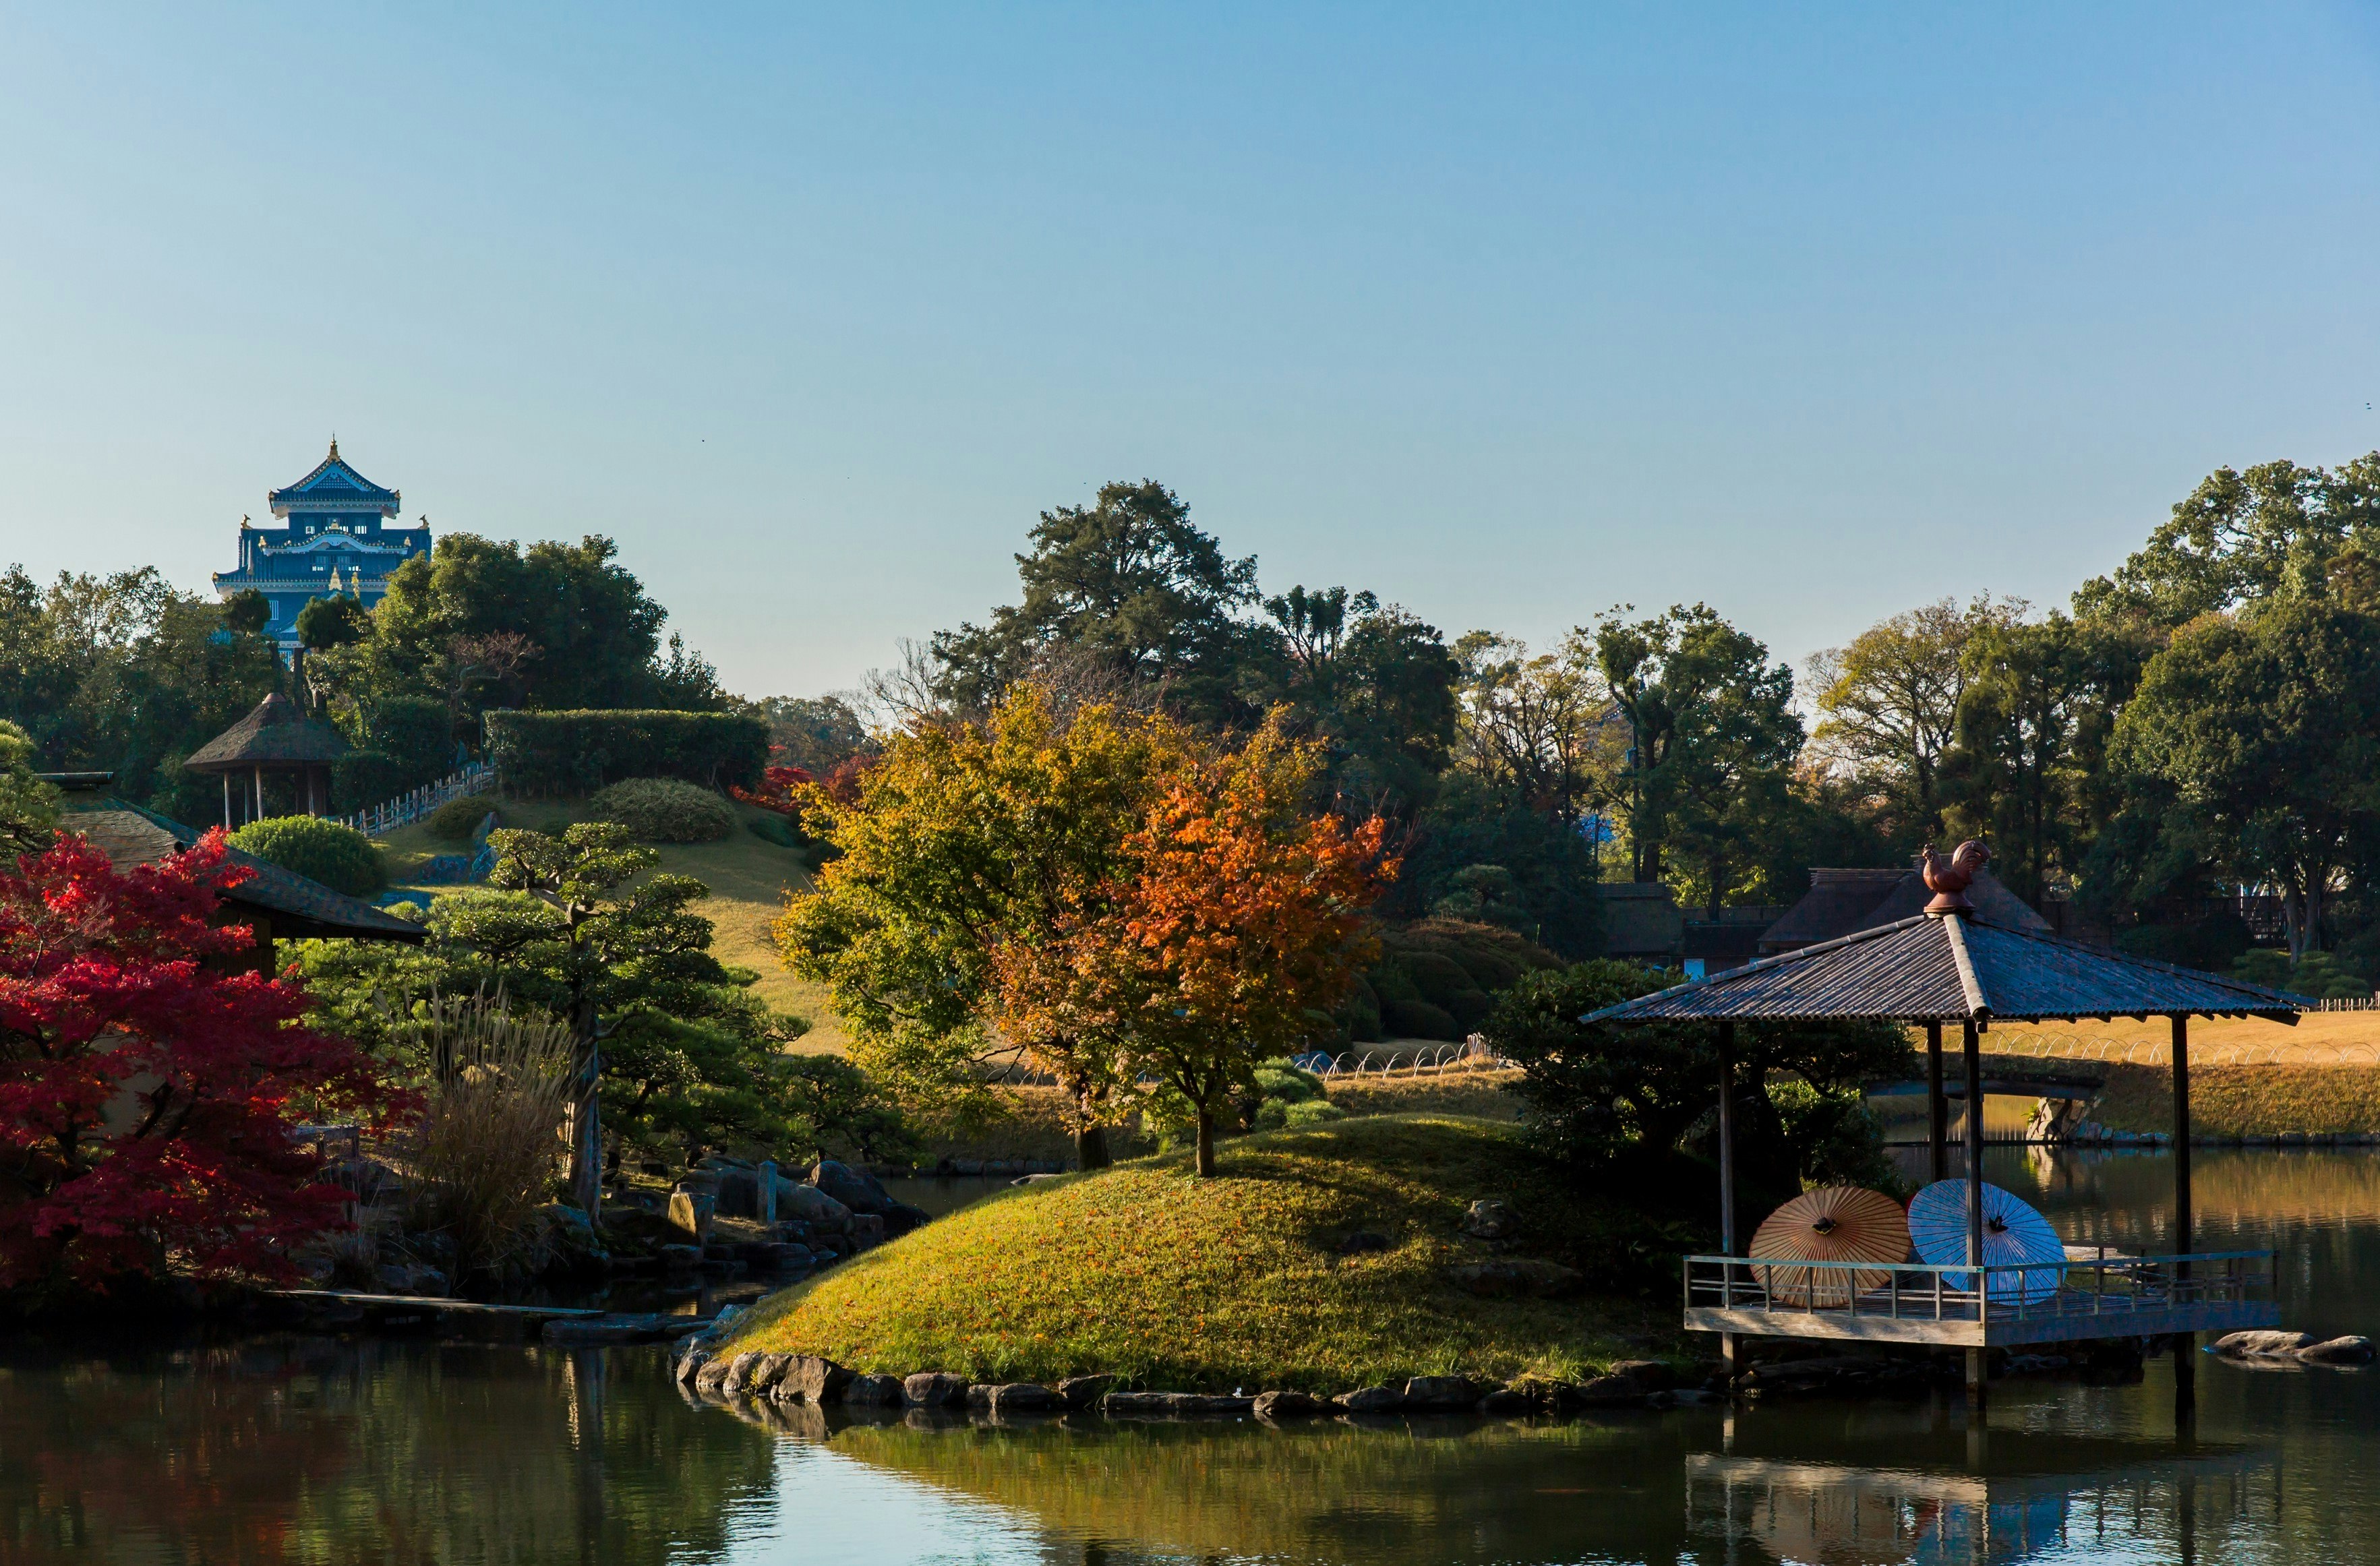 A view of Koraku-en garden in Okayama, with the still lake in the foreground leading away to green hills dotted with trees and an ornate castle visible in the background.